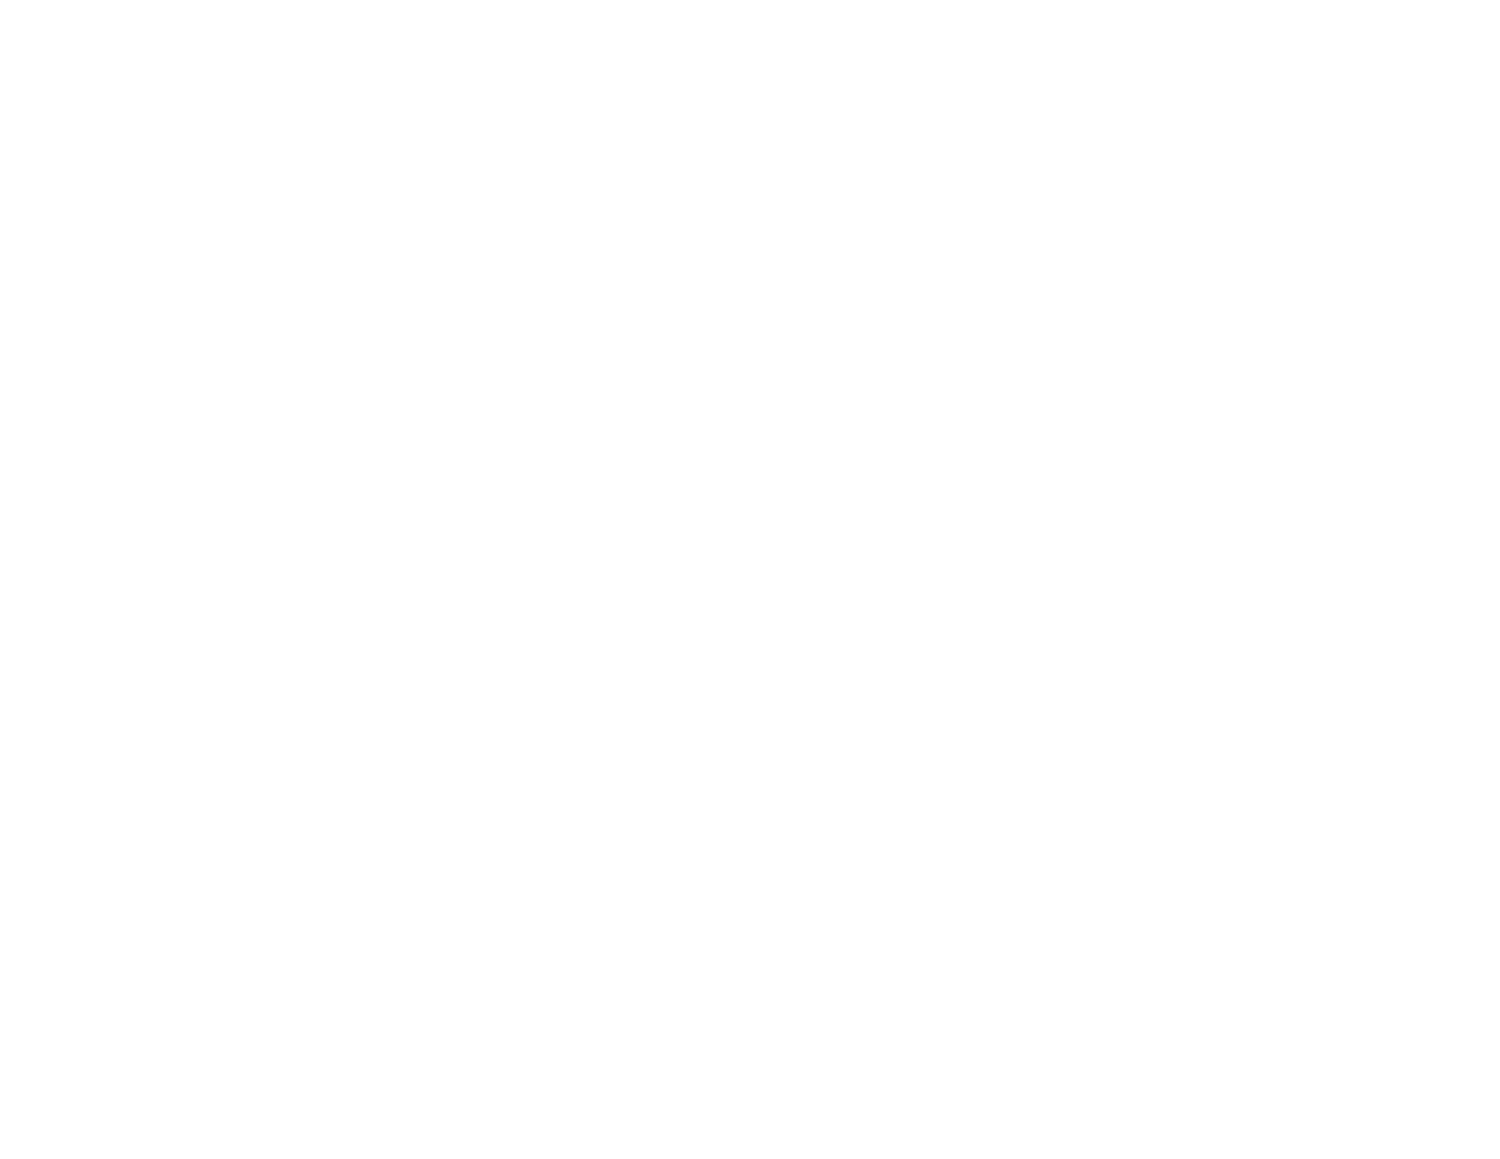 Table 14